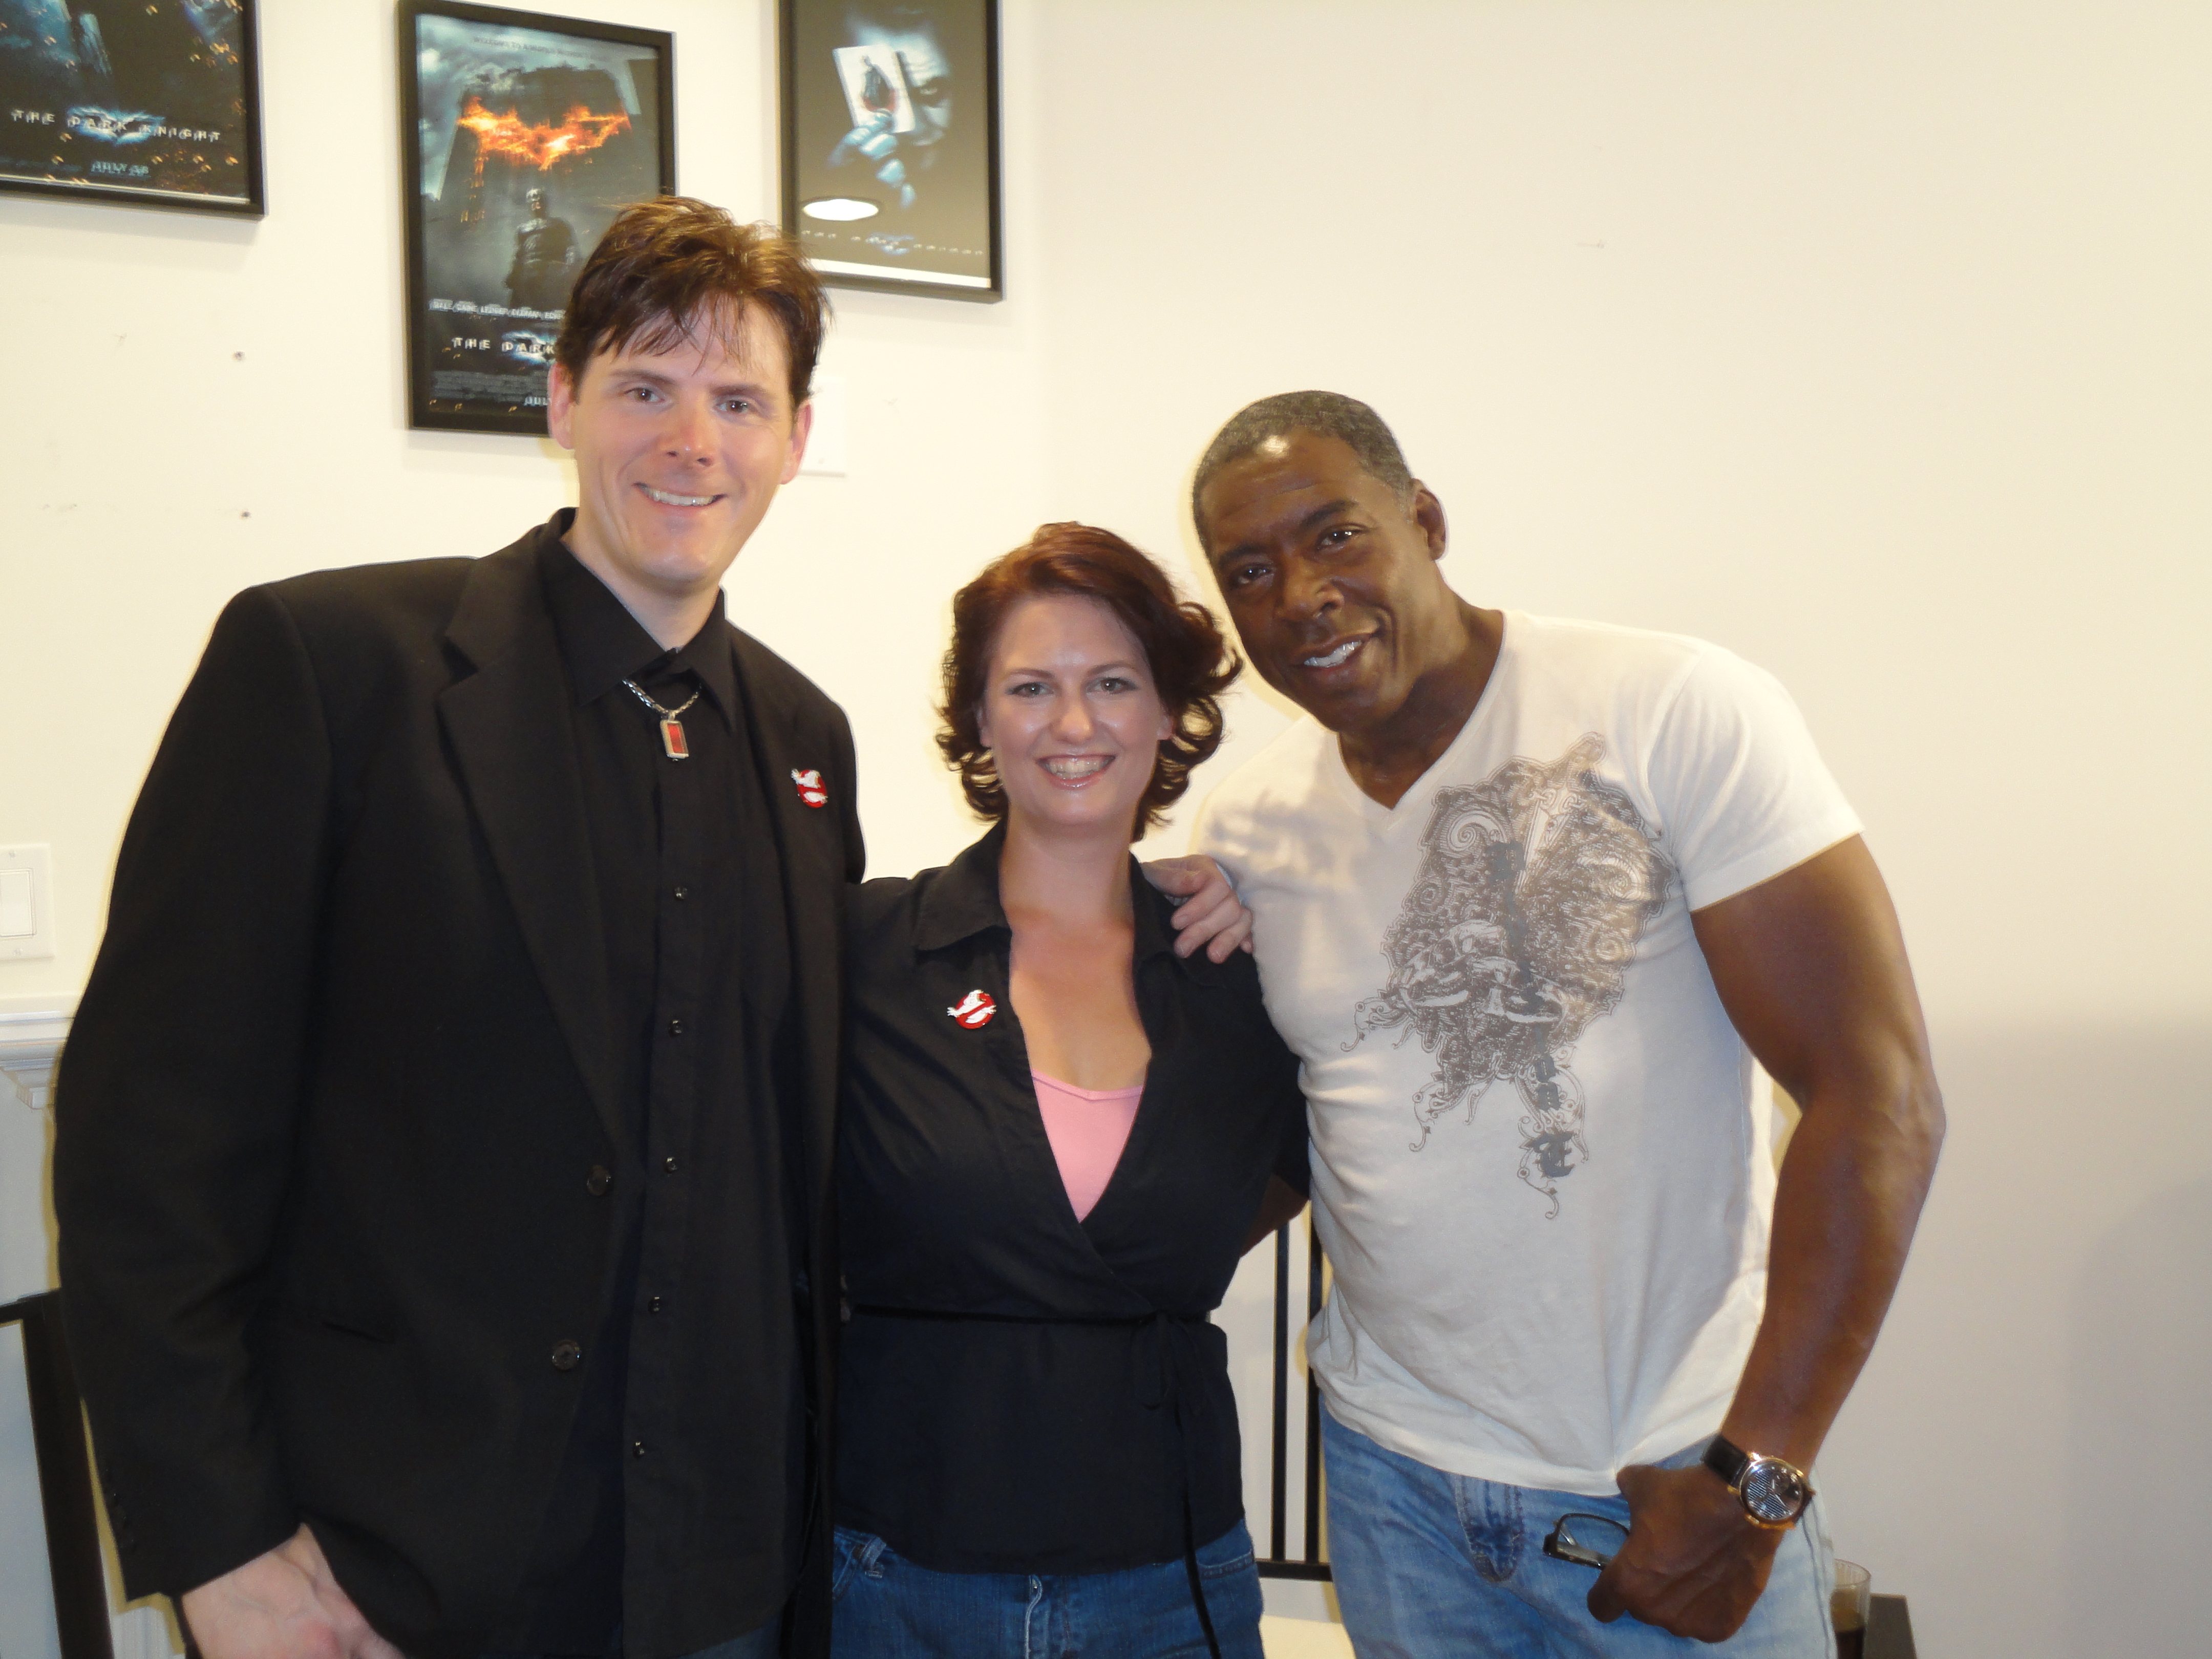 Hosts Derek Maki and Sheila Myjo pose with actor Ernie Hudson on set of the web series Coolwaters LIVE!